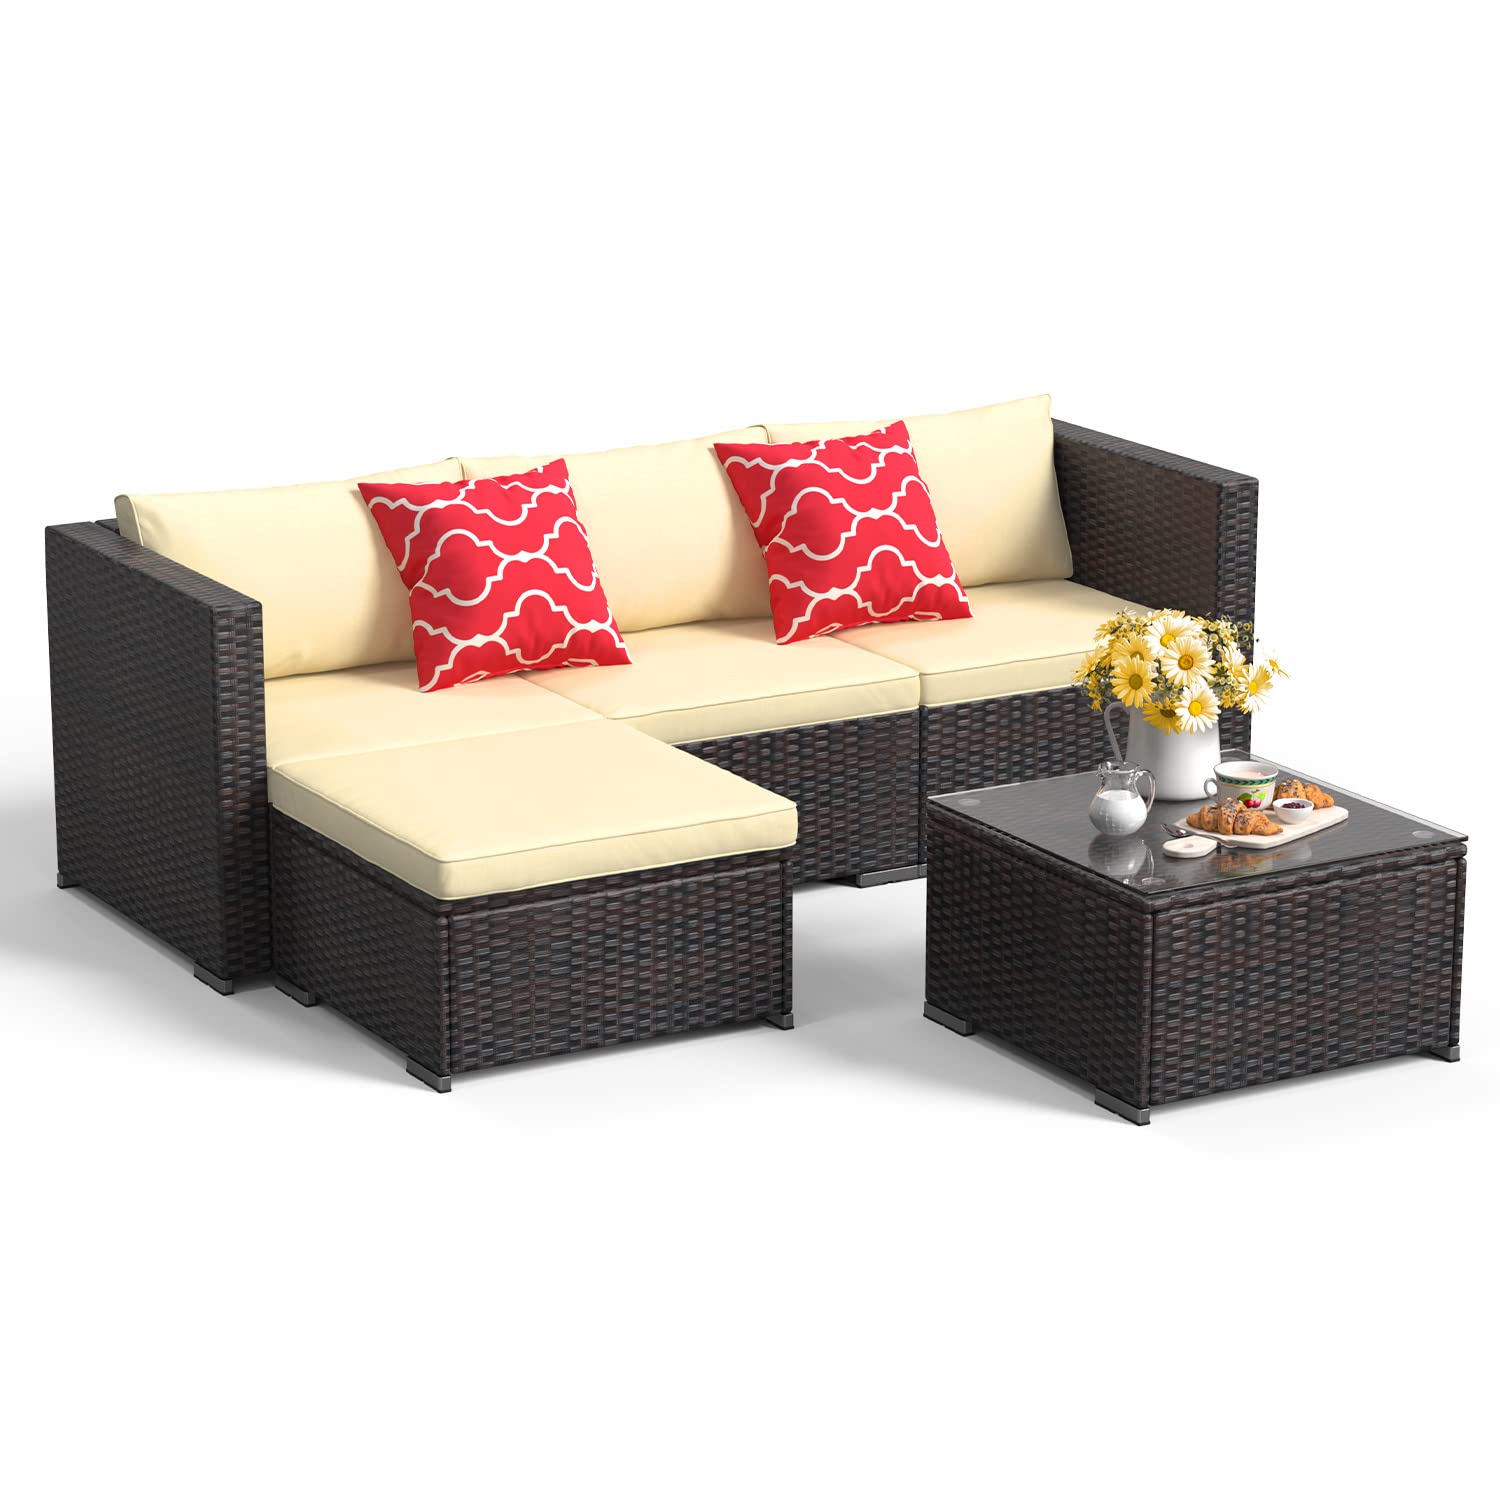 Lofka Patio Furniture Set Clearance, 5-Piece Outdoor Sectional Sofa Rattan Set with Coffee Table for Conversation & Dining, Beige - image 1 of 8